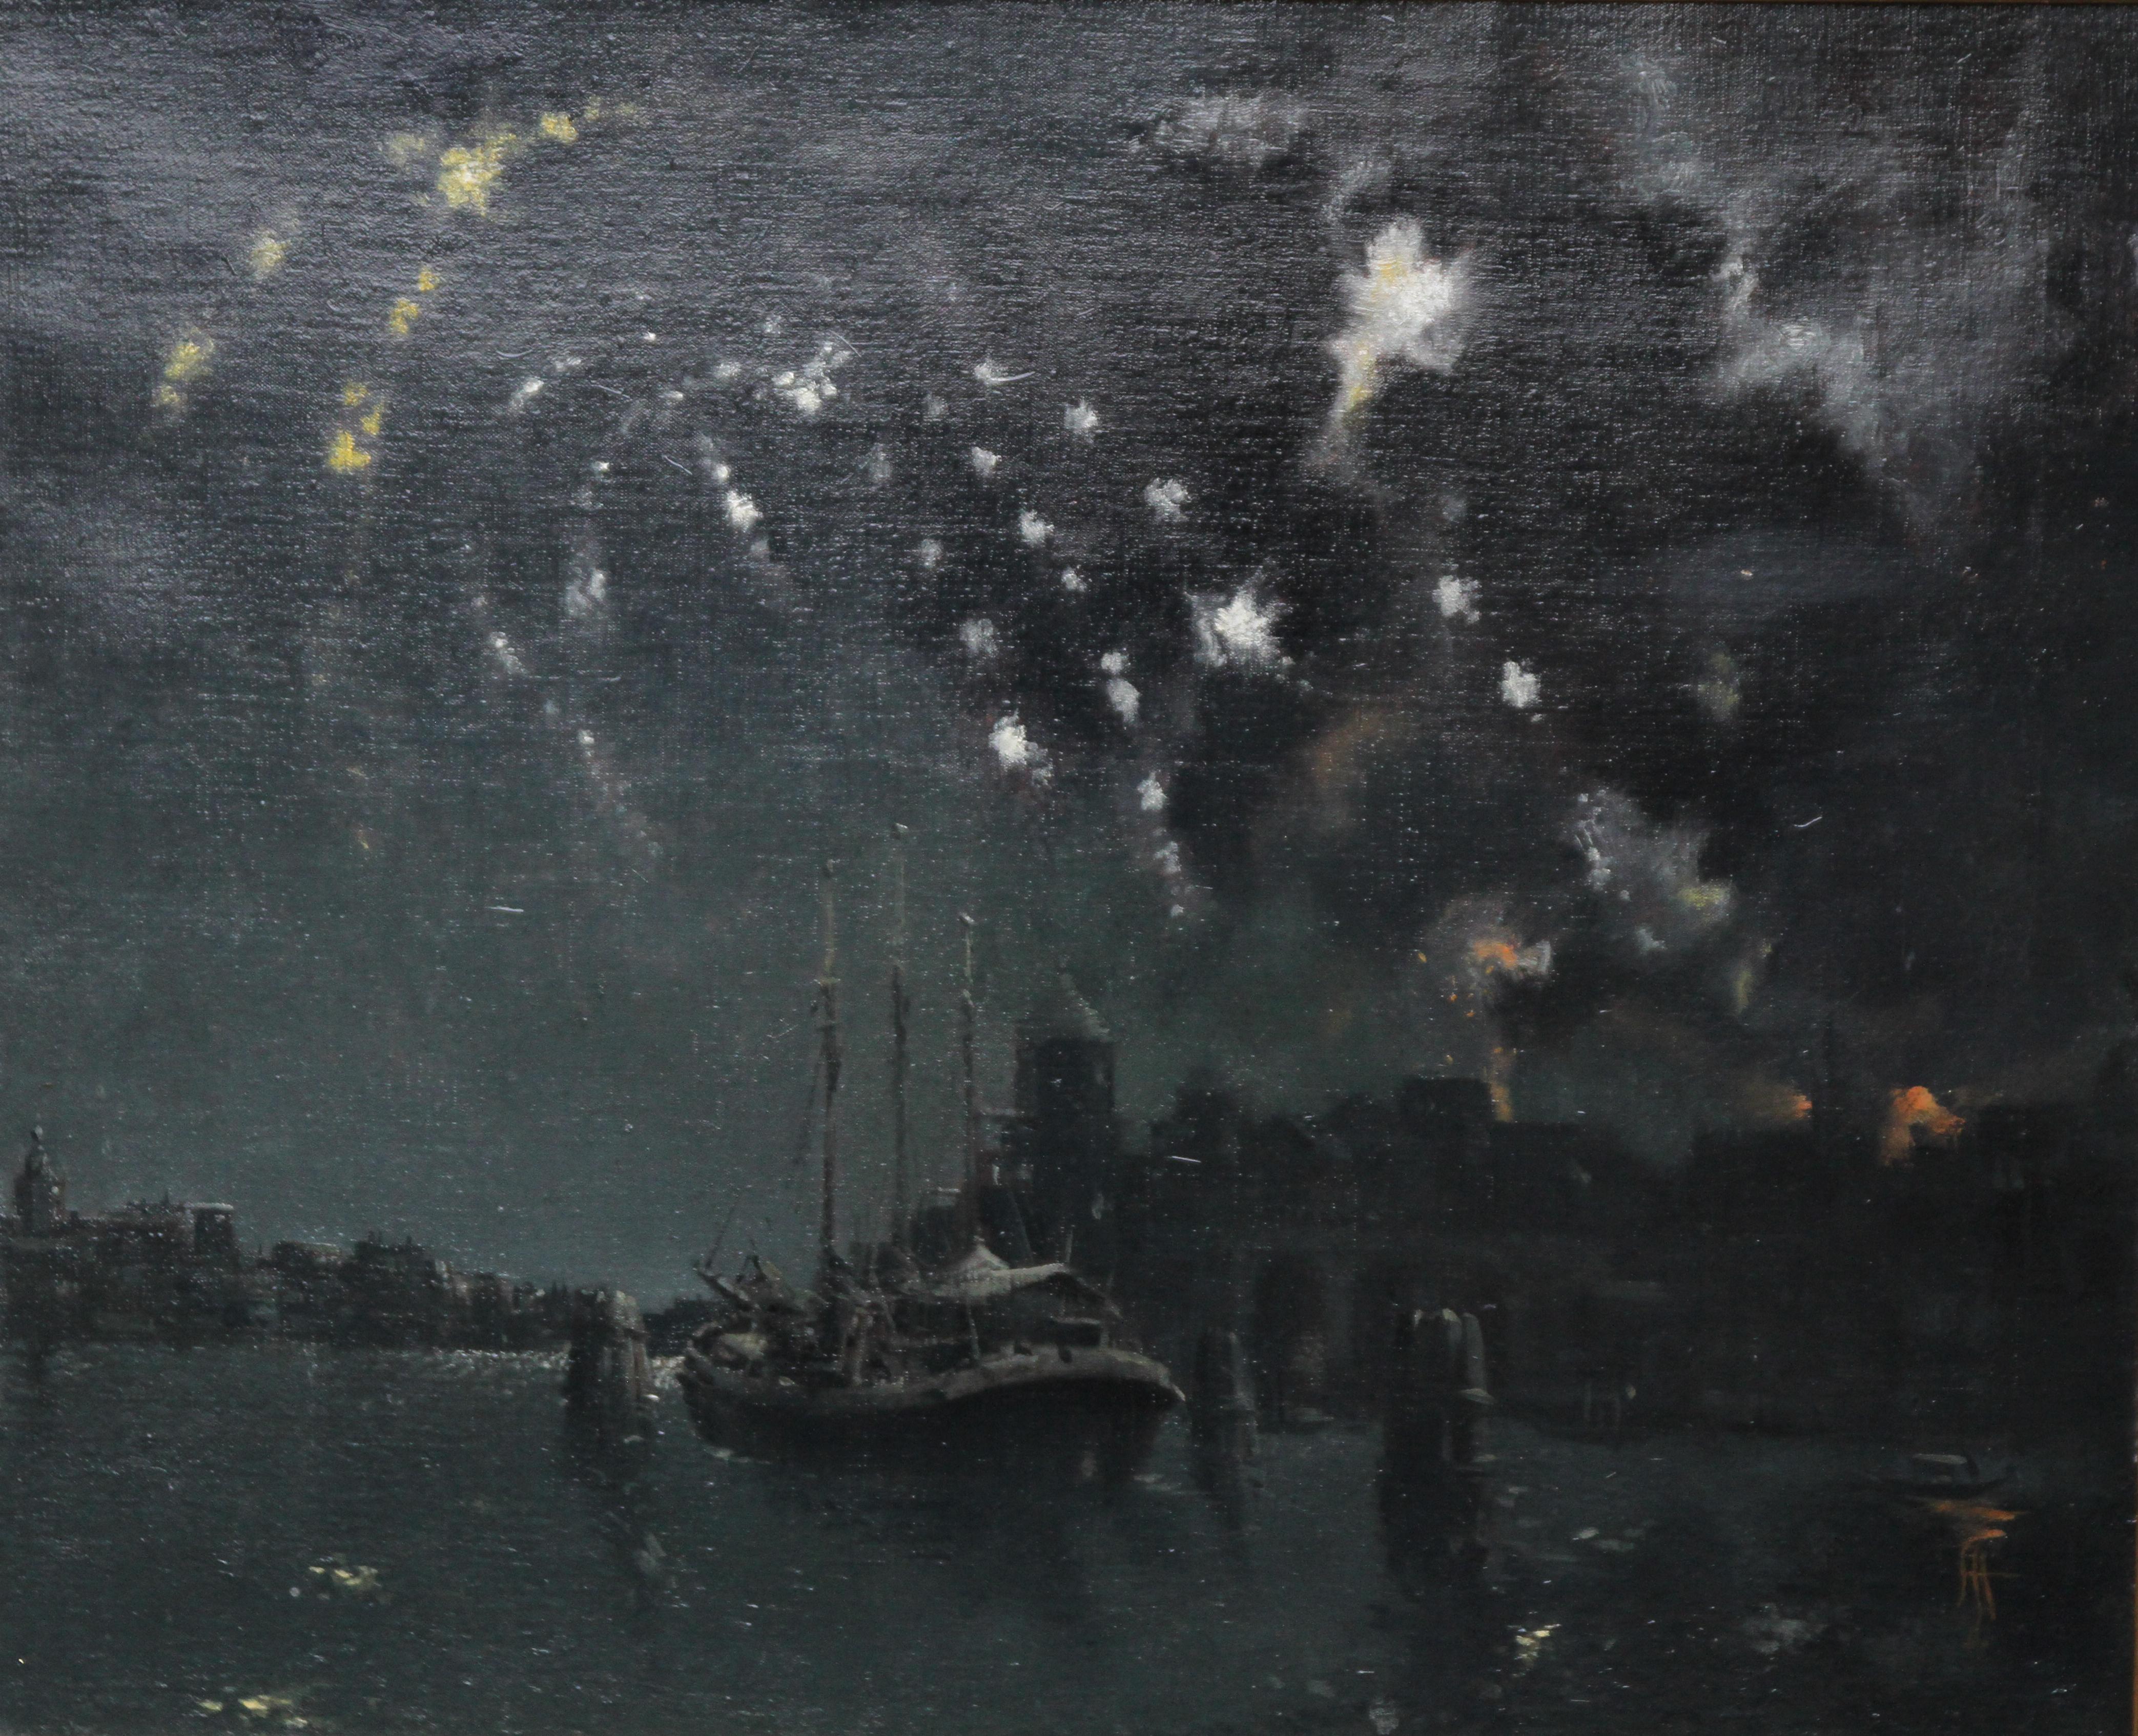 Fireworks on the Thames, London - British art river night landscape oil painting - Painting by Laurence Henry Irving